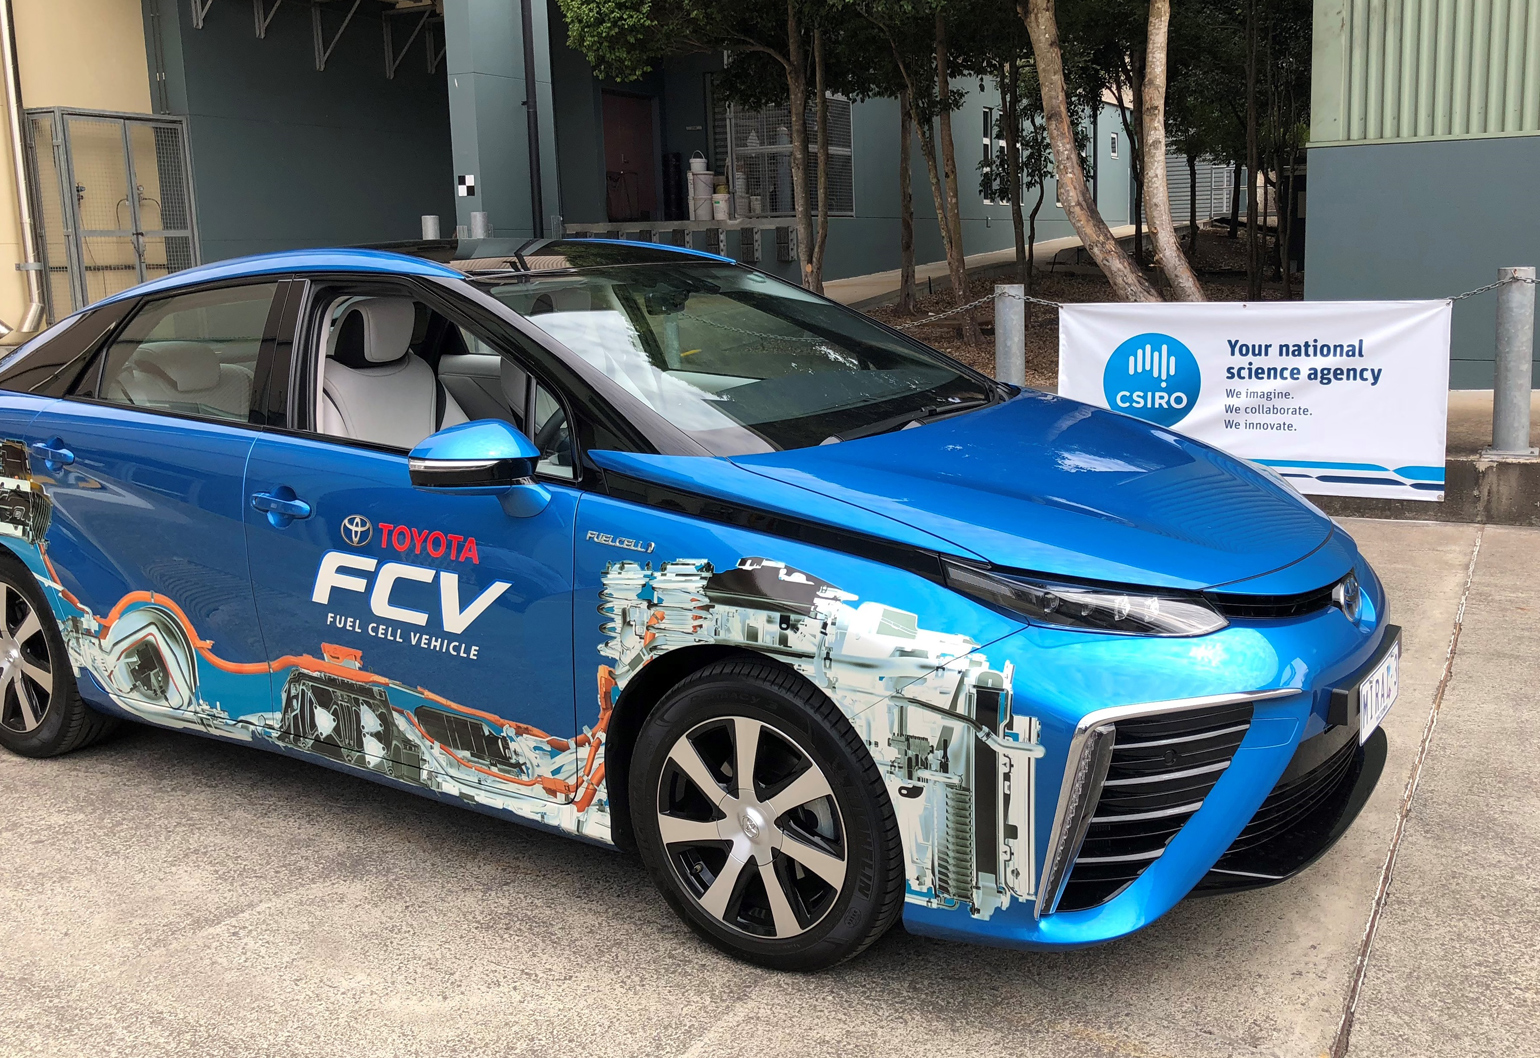 hydrogen-powered-cars-on-the-horizon-after-an-australian-first-trial